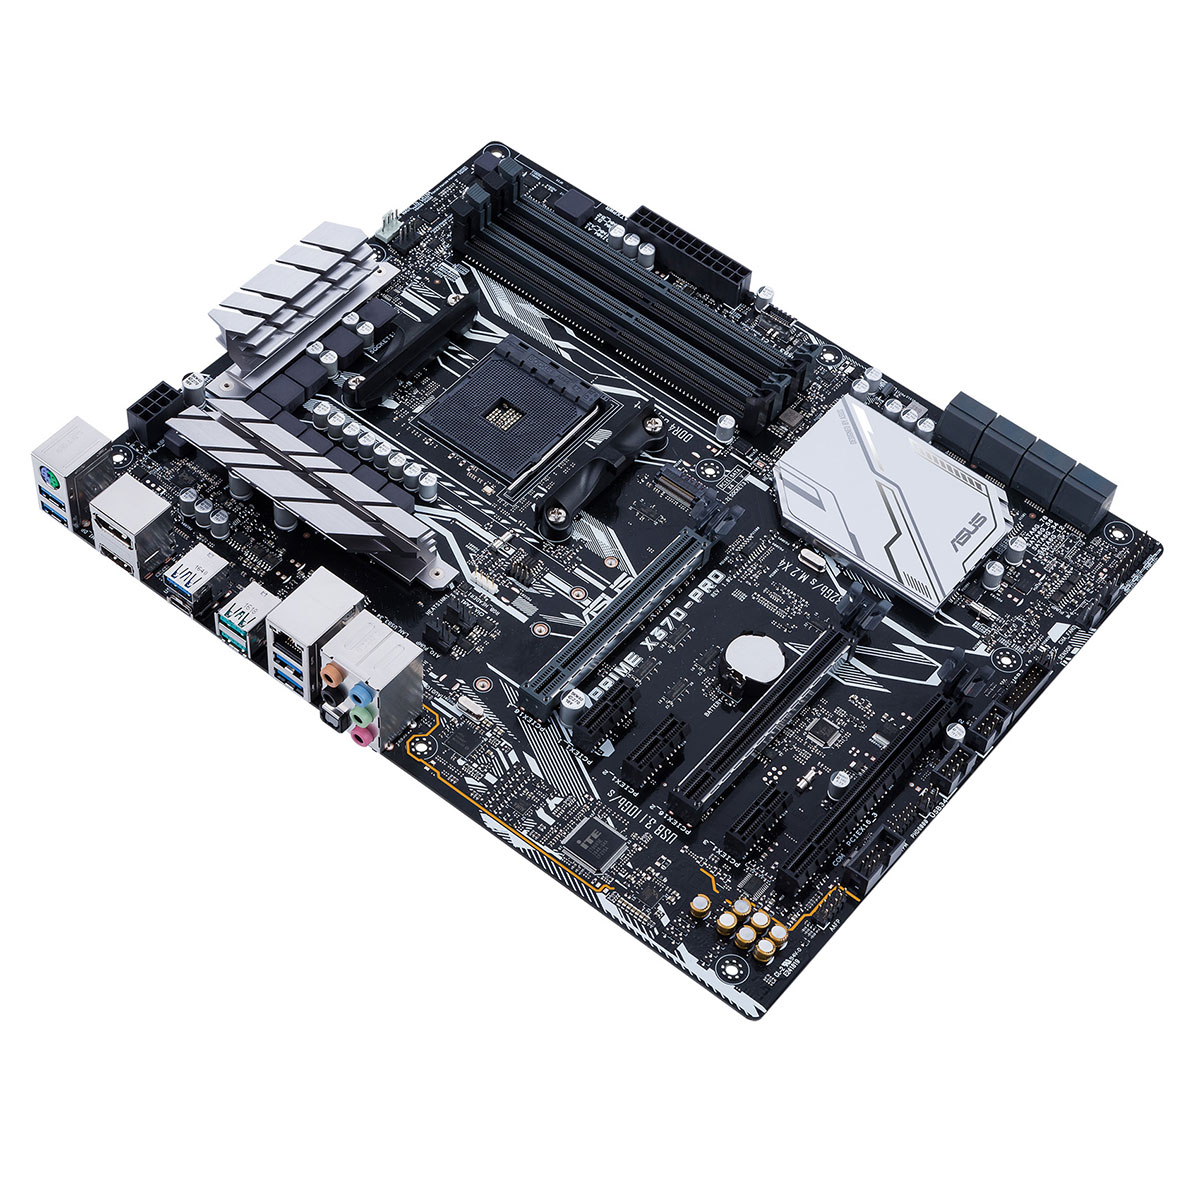 Asus Prime X370-Pro - Motherboard Specifications On MotherboardDB